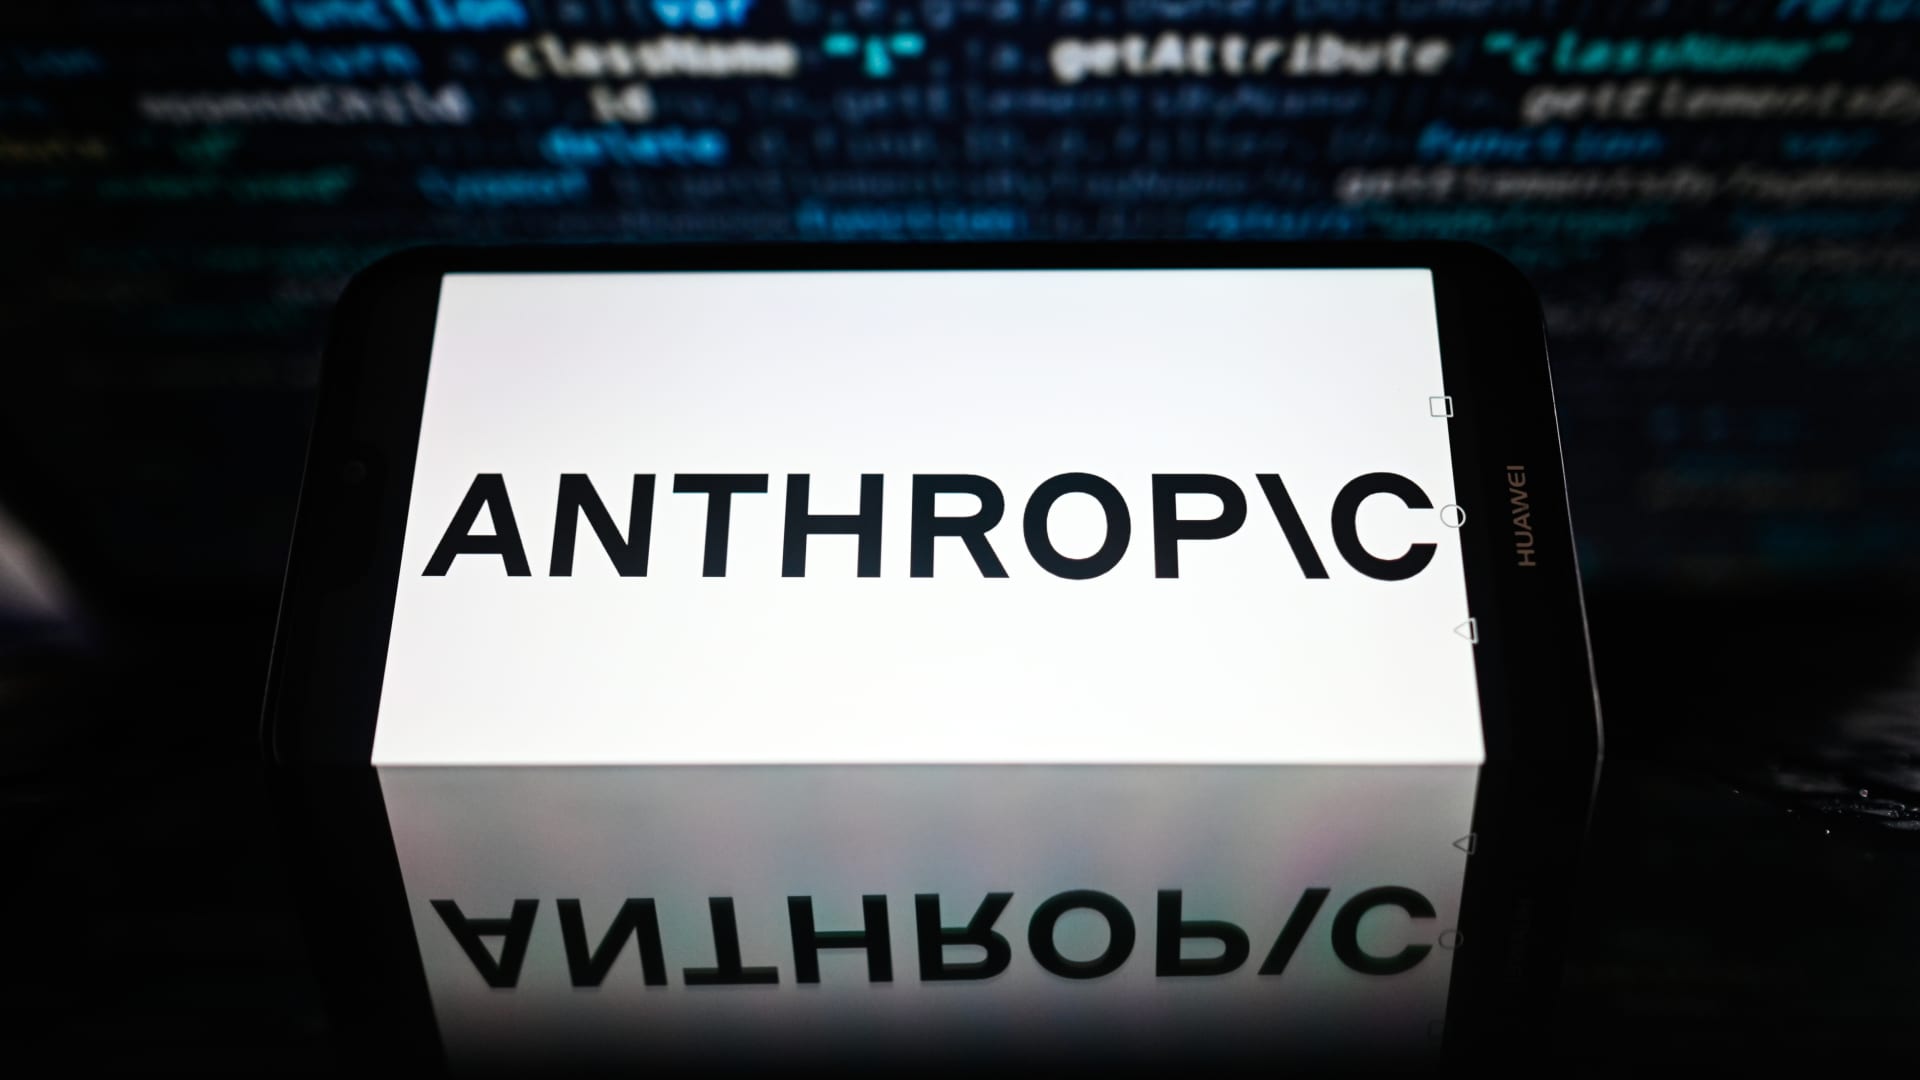 Amazon-backed Anthropic launches iPhone app and business tier to compete with OpenAI's ChatGPT